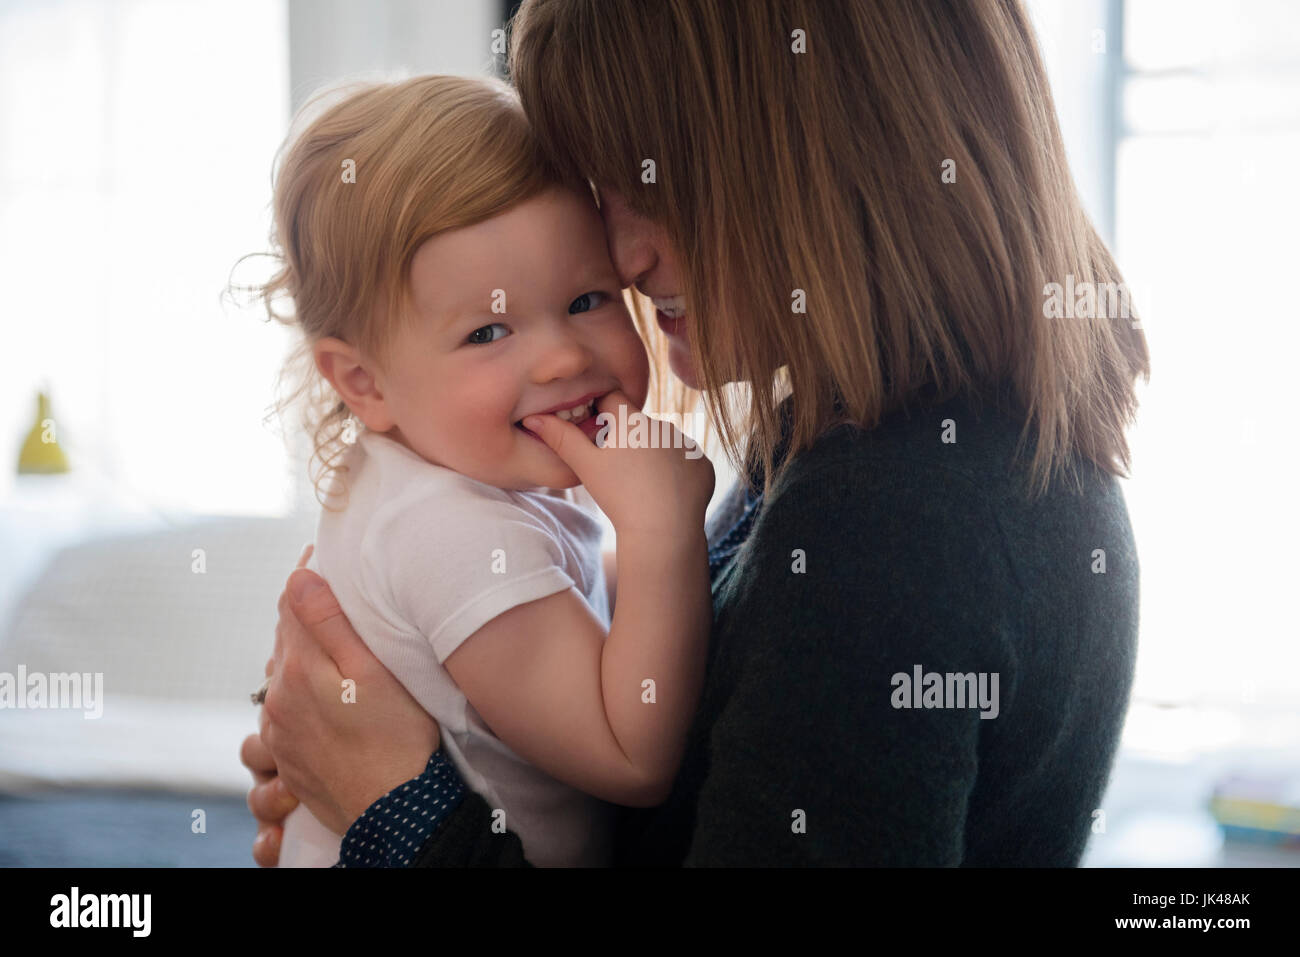 Caucasian mother holding daughter smiling Banque D'Images